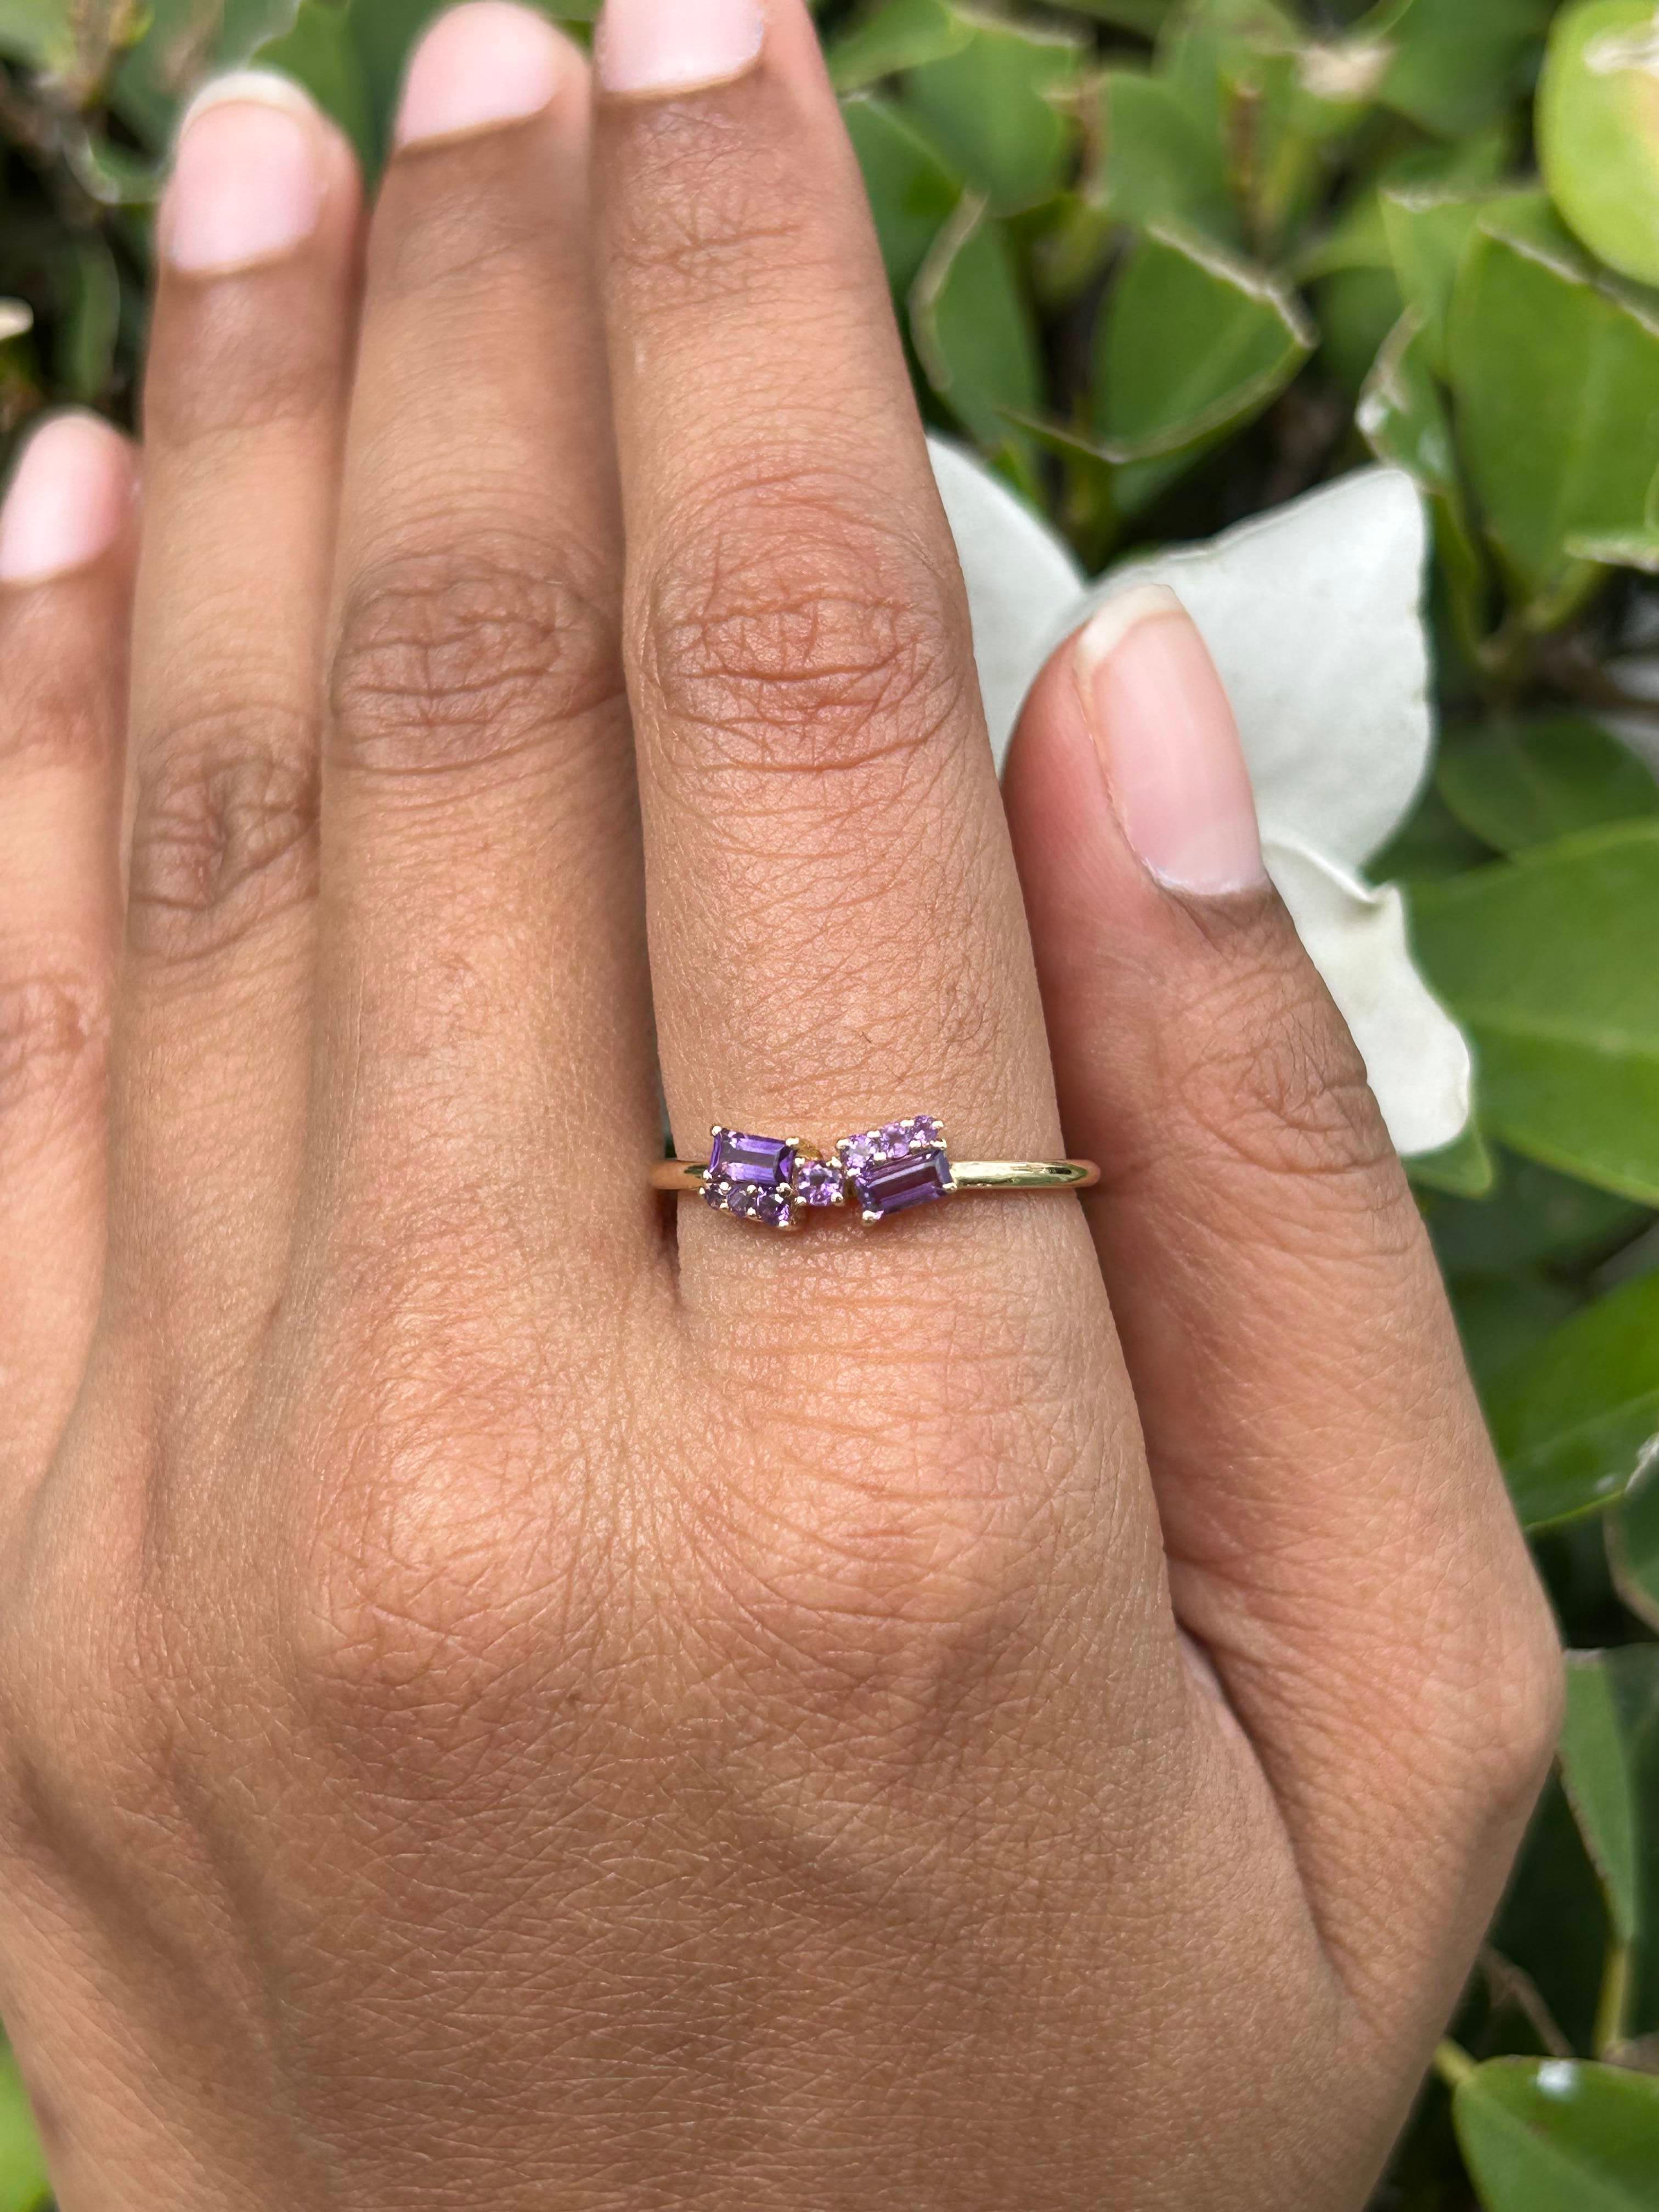 For Sale:  Everyday Wear Asymmetrical Amethyst Ring For Her in 14k Solid Yellow Gold 10